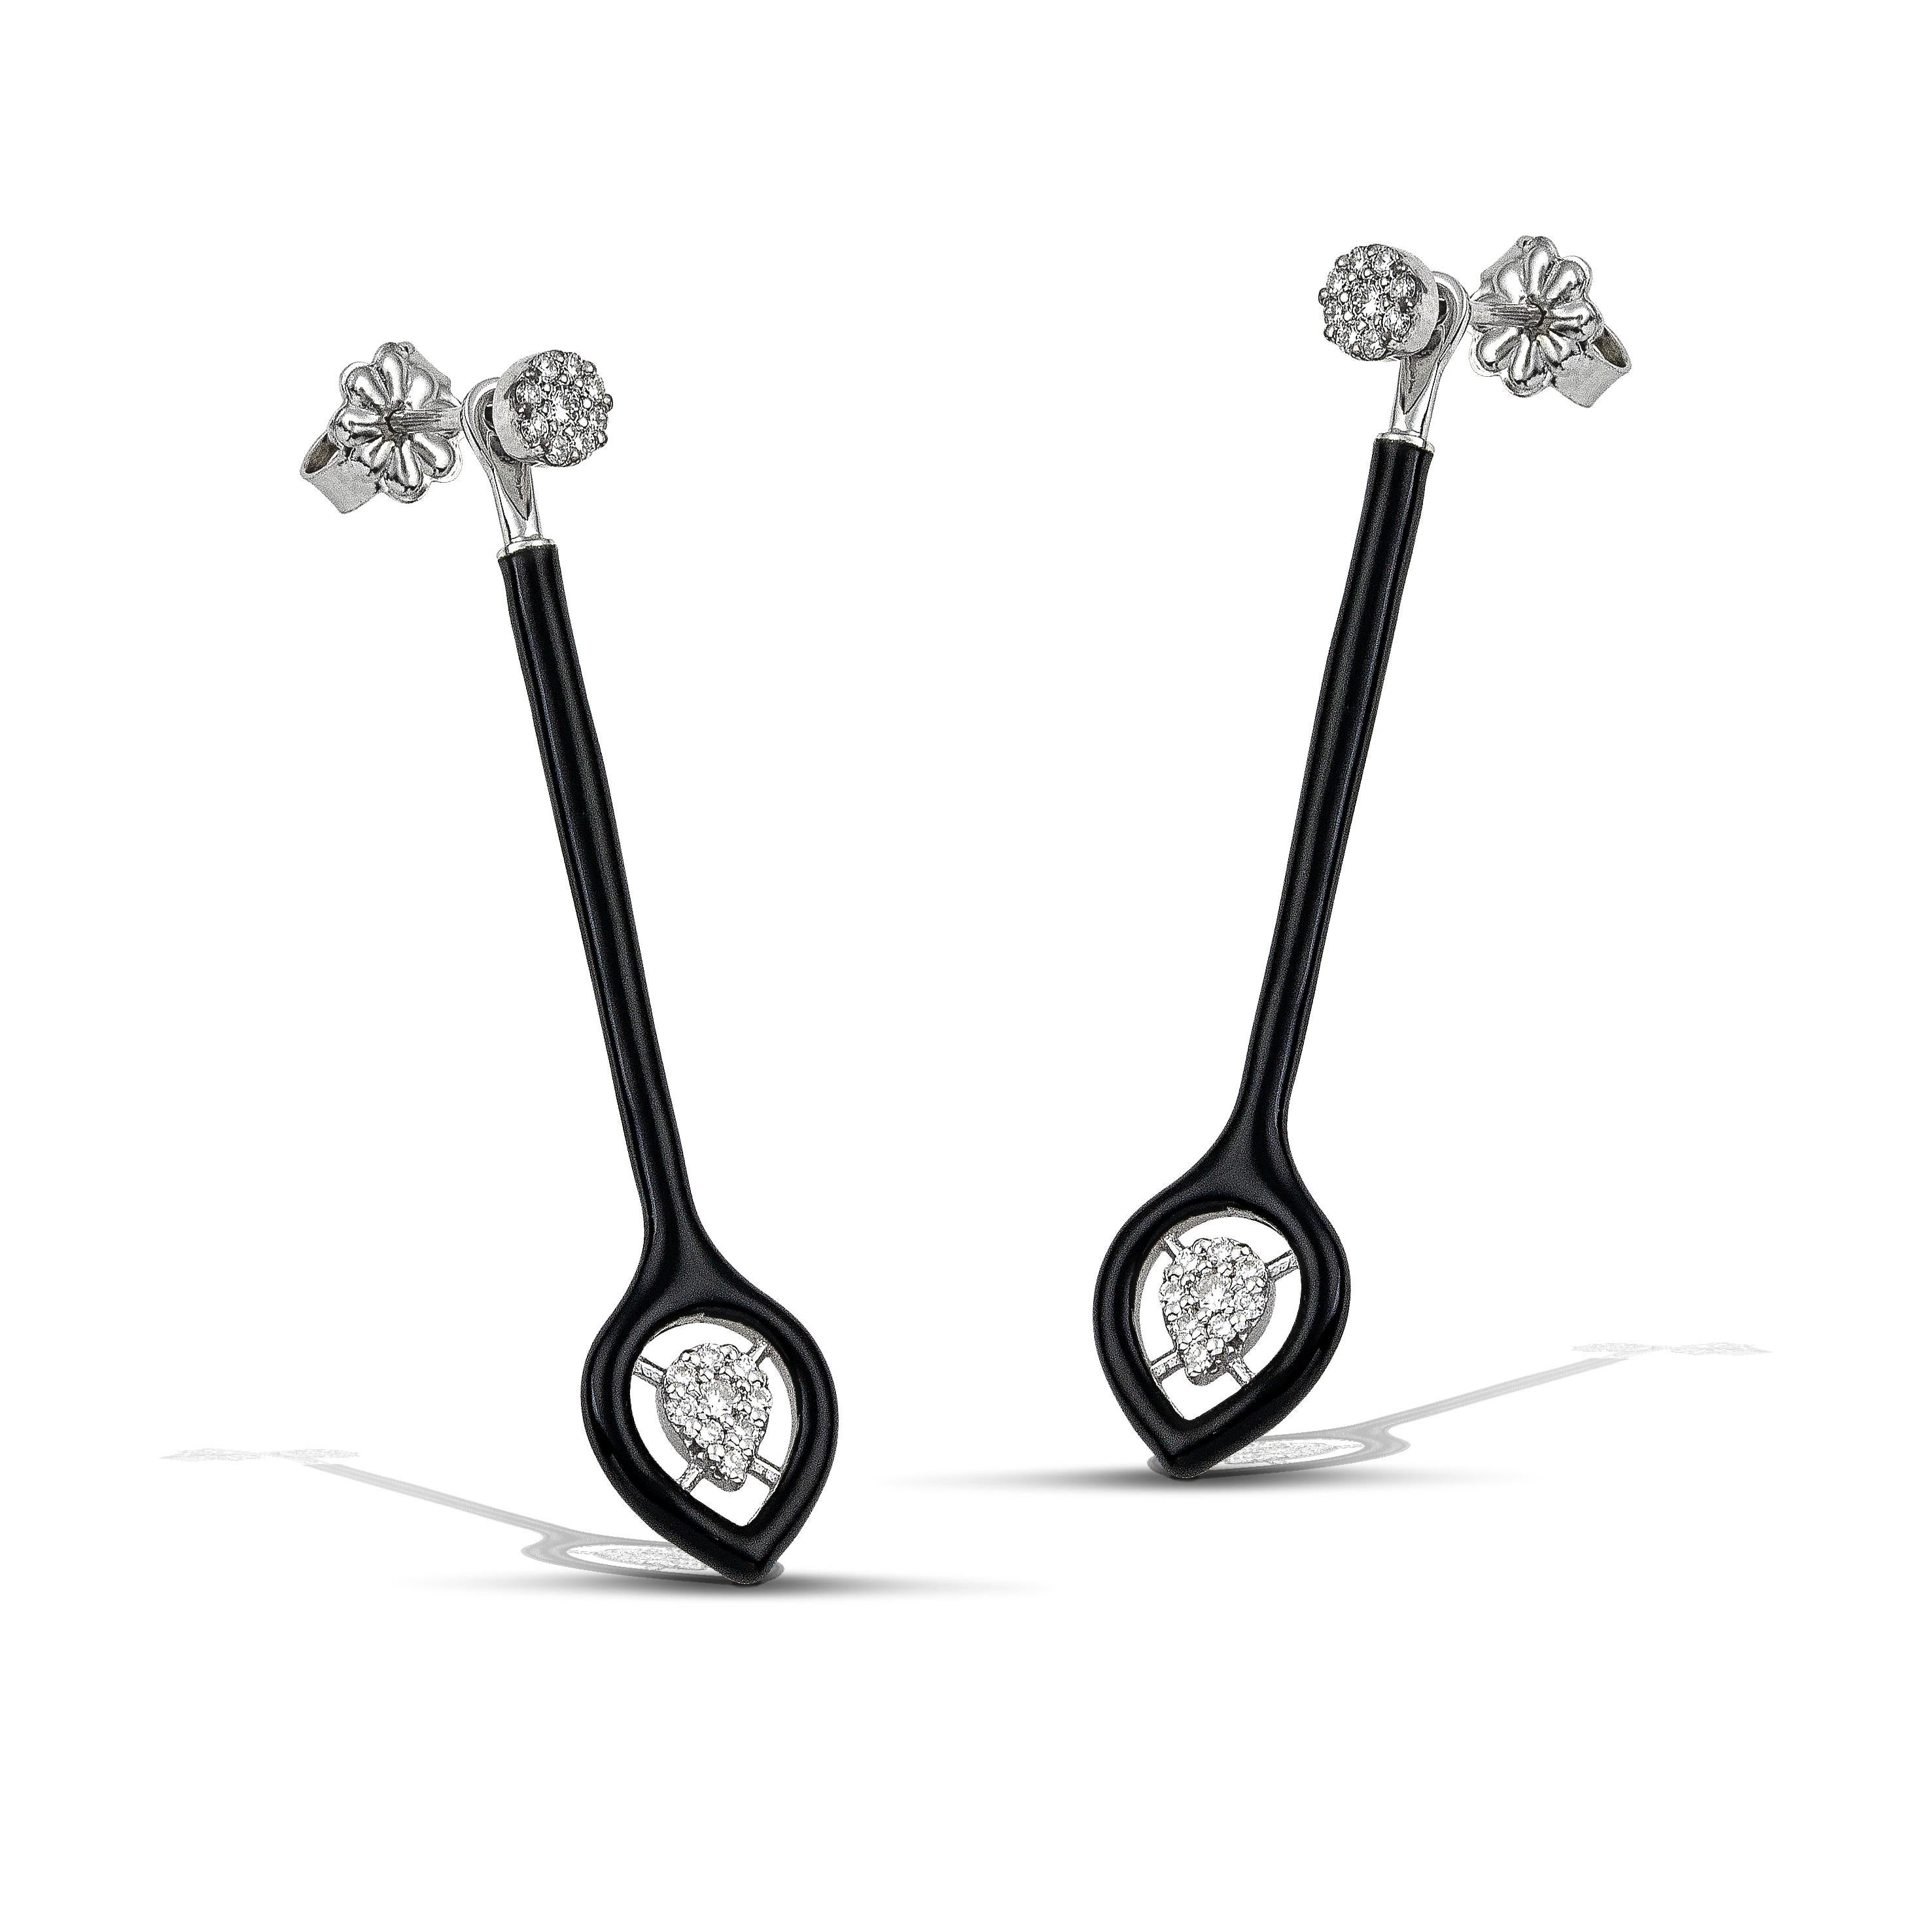 14K gold diamond earrings with a classic black colour accent, the perfect gift for yourself or a loved one.
100% Recycled 14 K White Gold
Diamonds
Black Enamel
Two in one: The long part of the earring is Removable- Detachable, allowing a beautiful